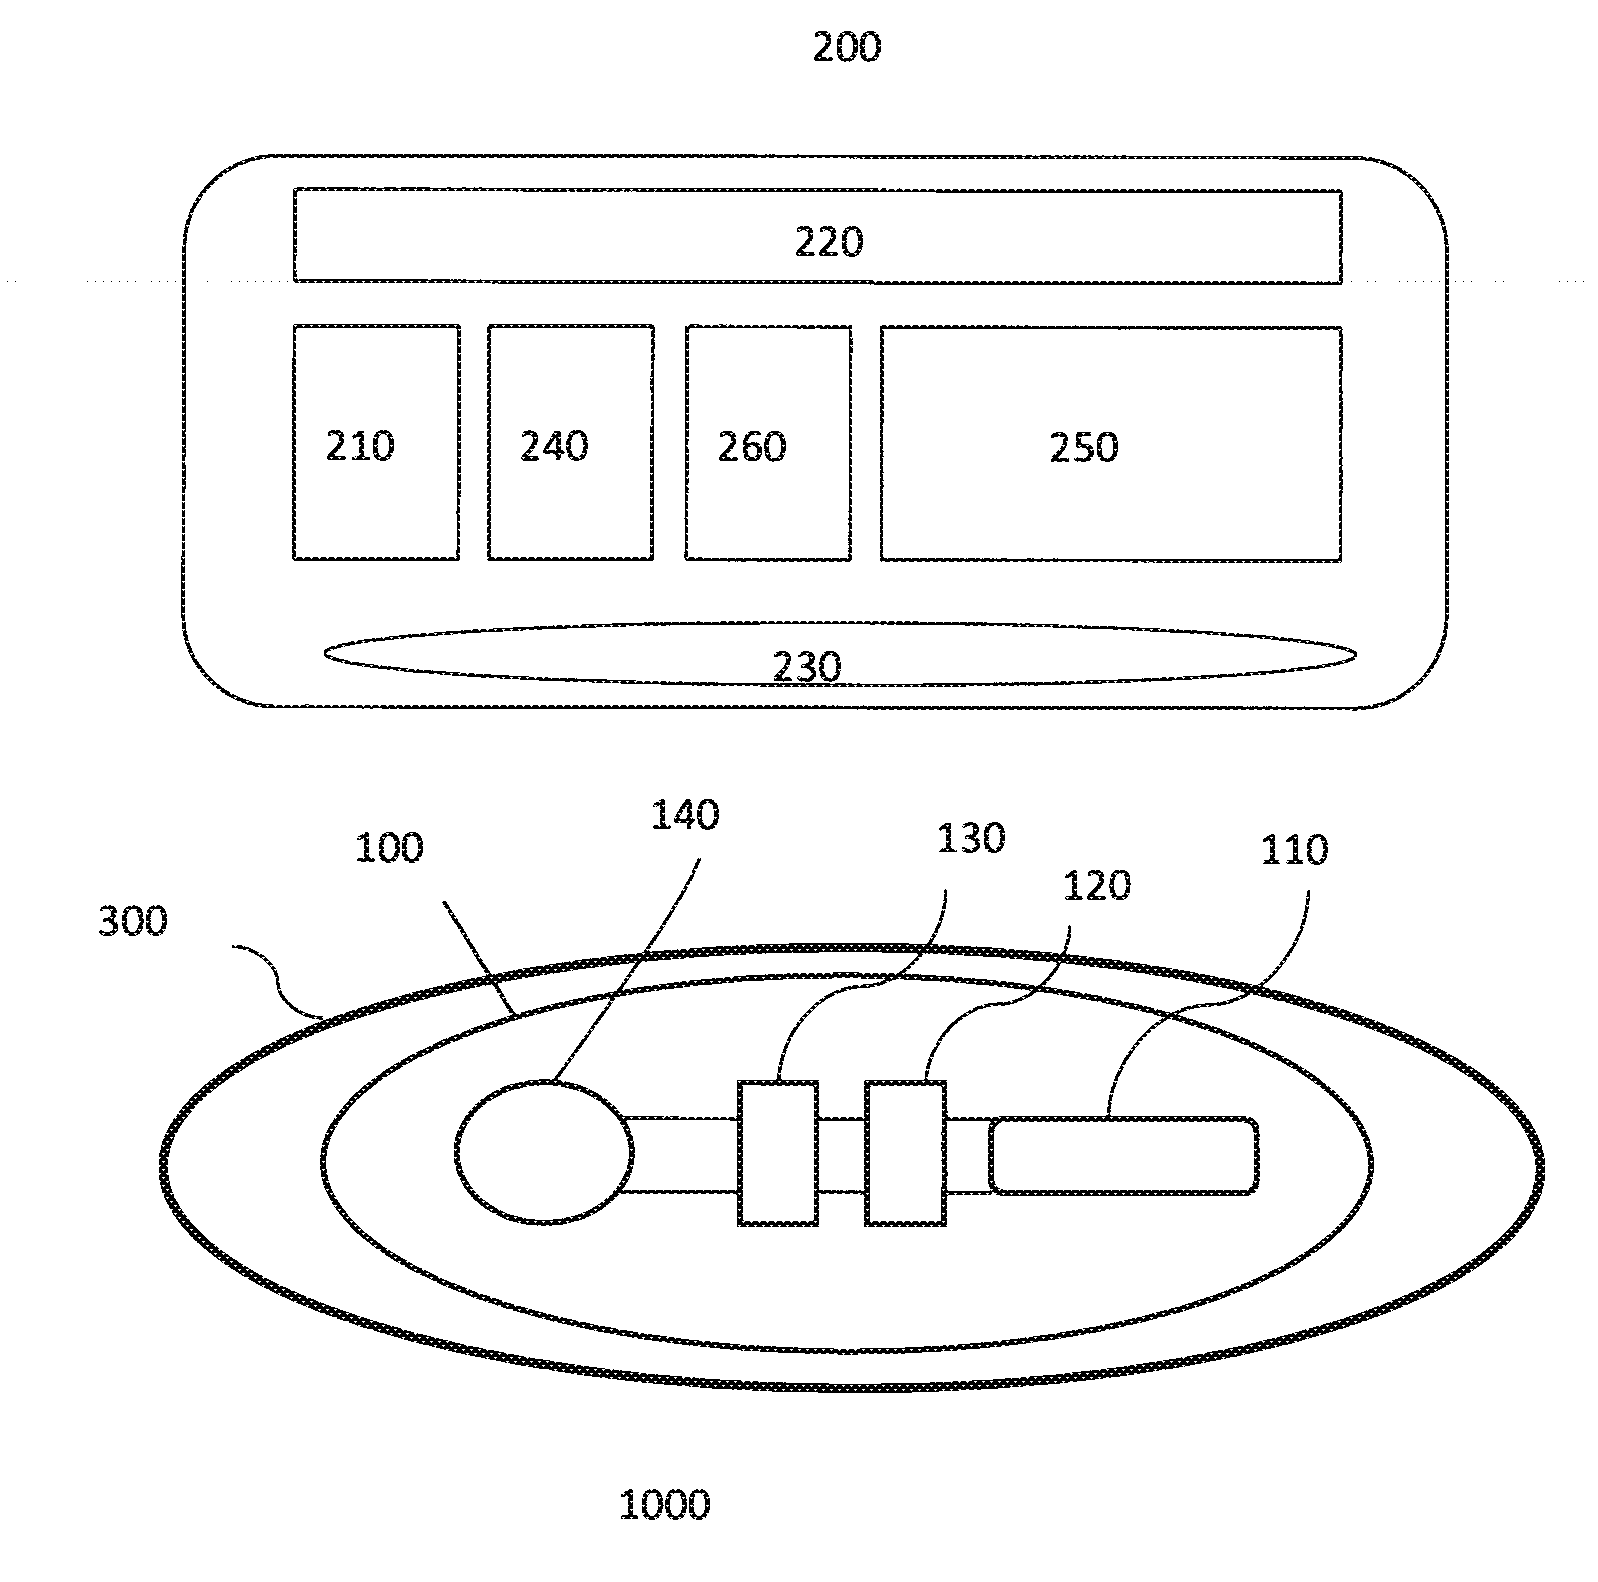 Apparatus and Method for Providing Product Information